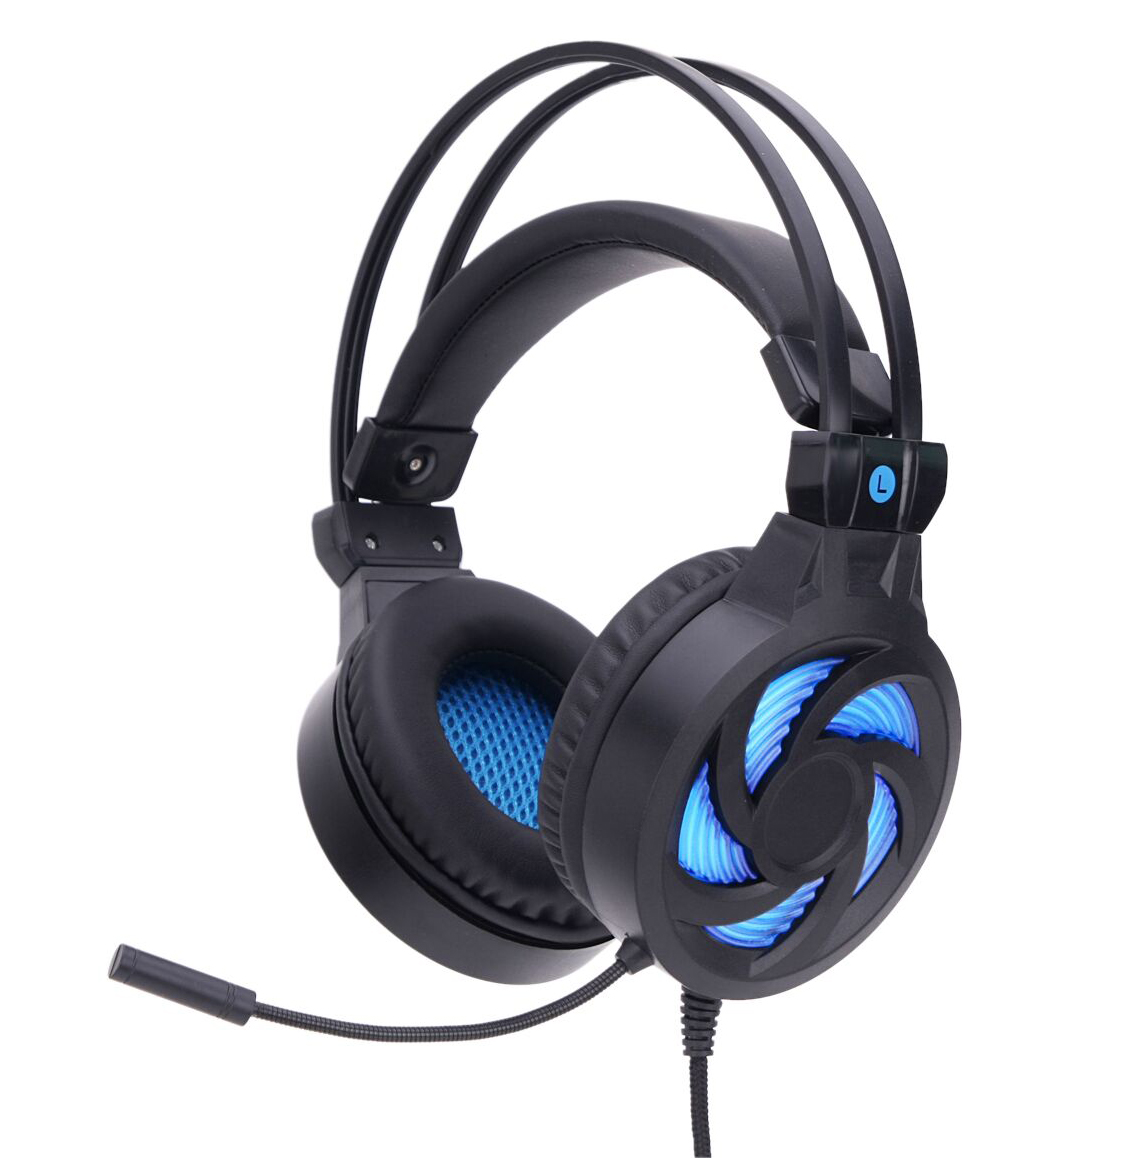 High quality game headset